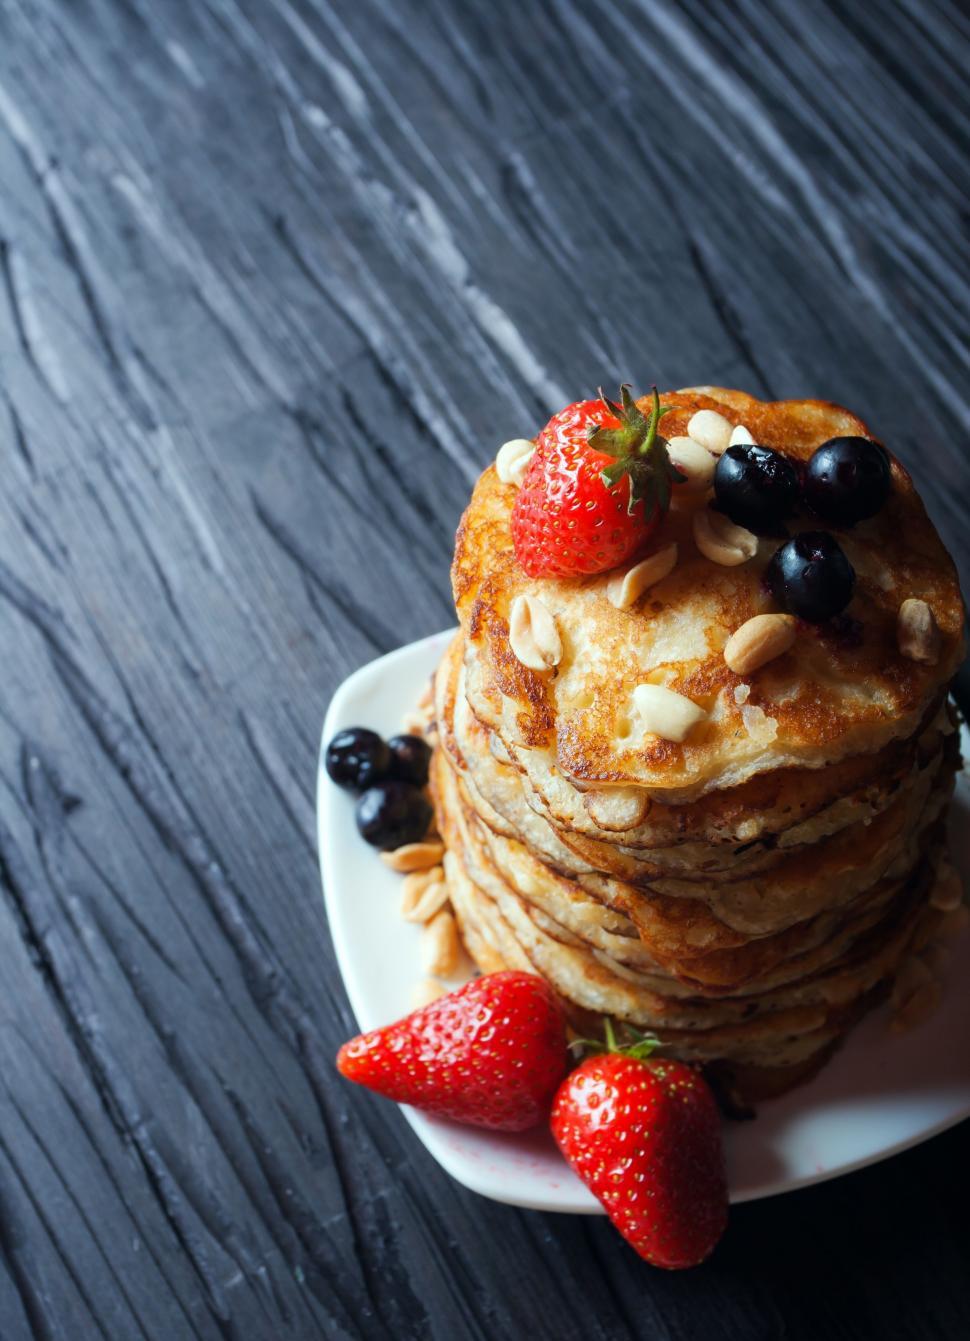 Free Image of Stack of Pancakes Topped With Berries and Nuts 